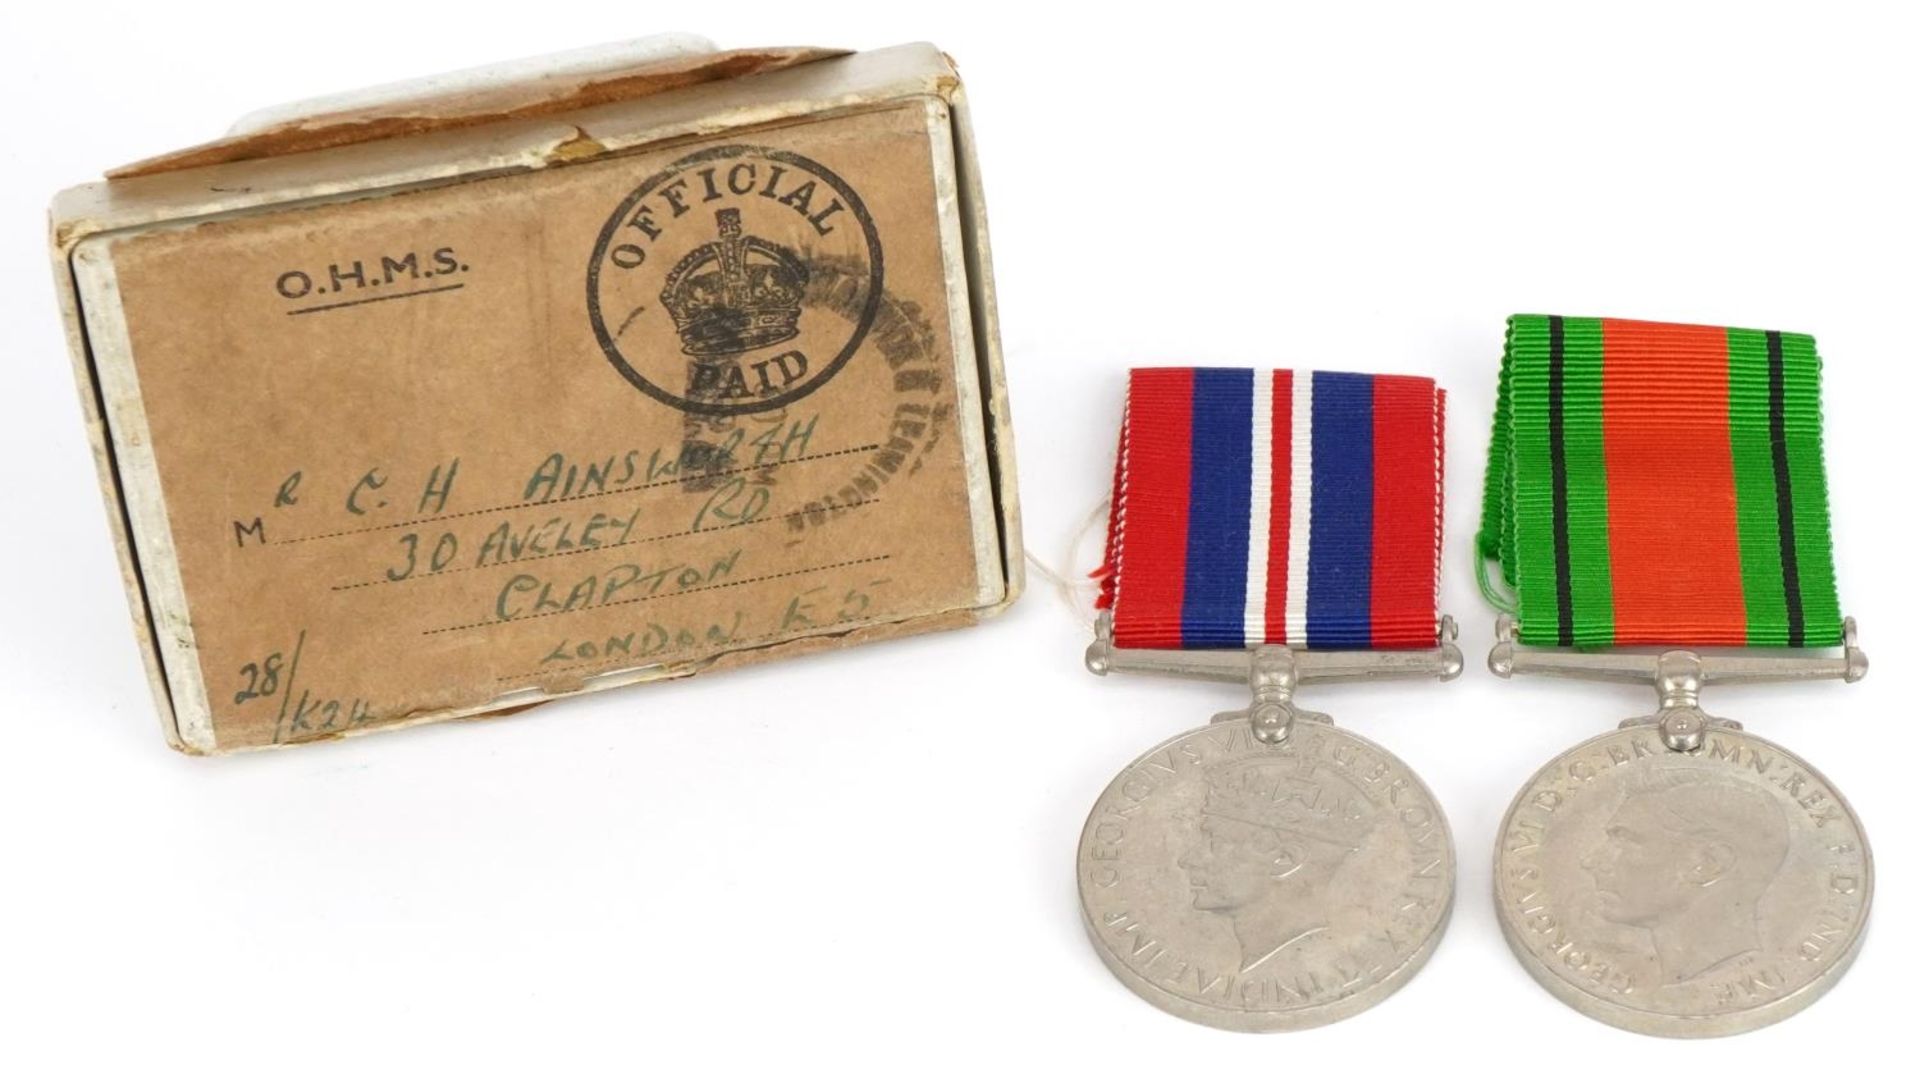 Two British military World War II medals with box of issue inscribed R C H Ainsworth : For further